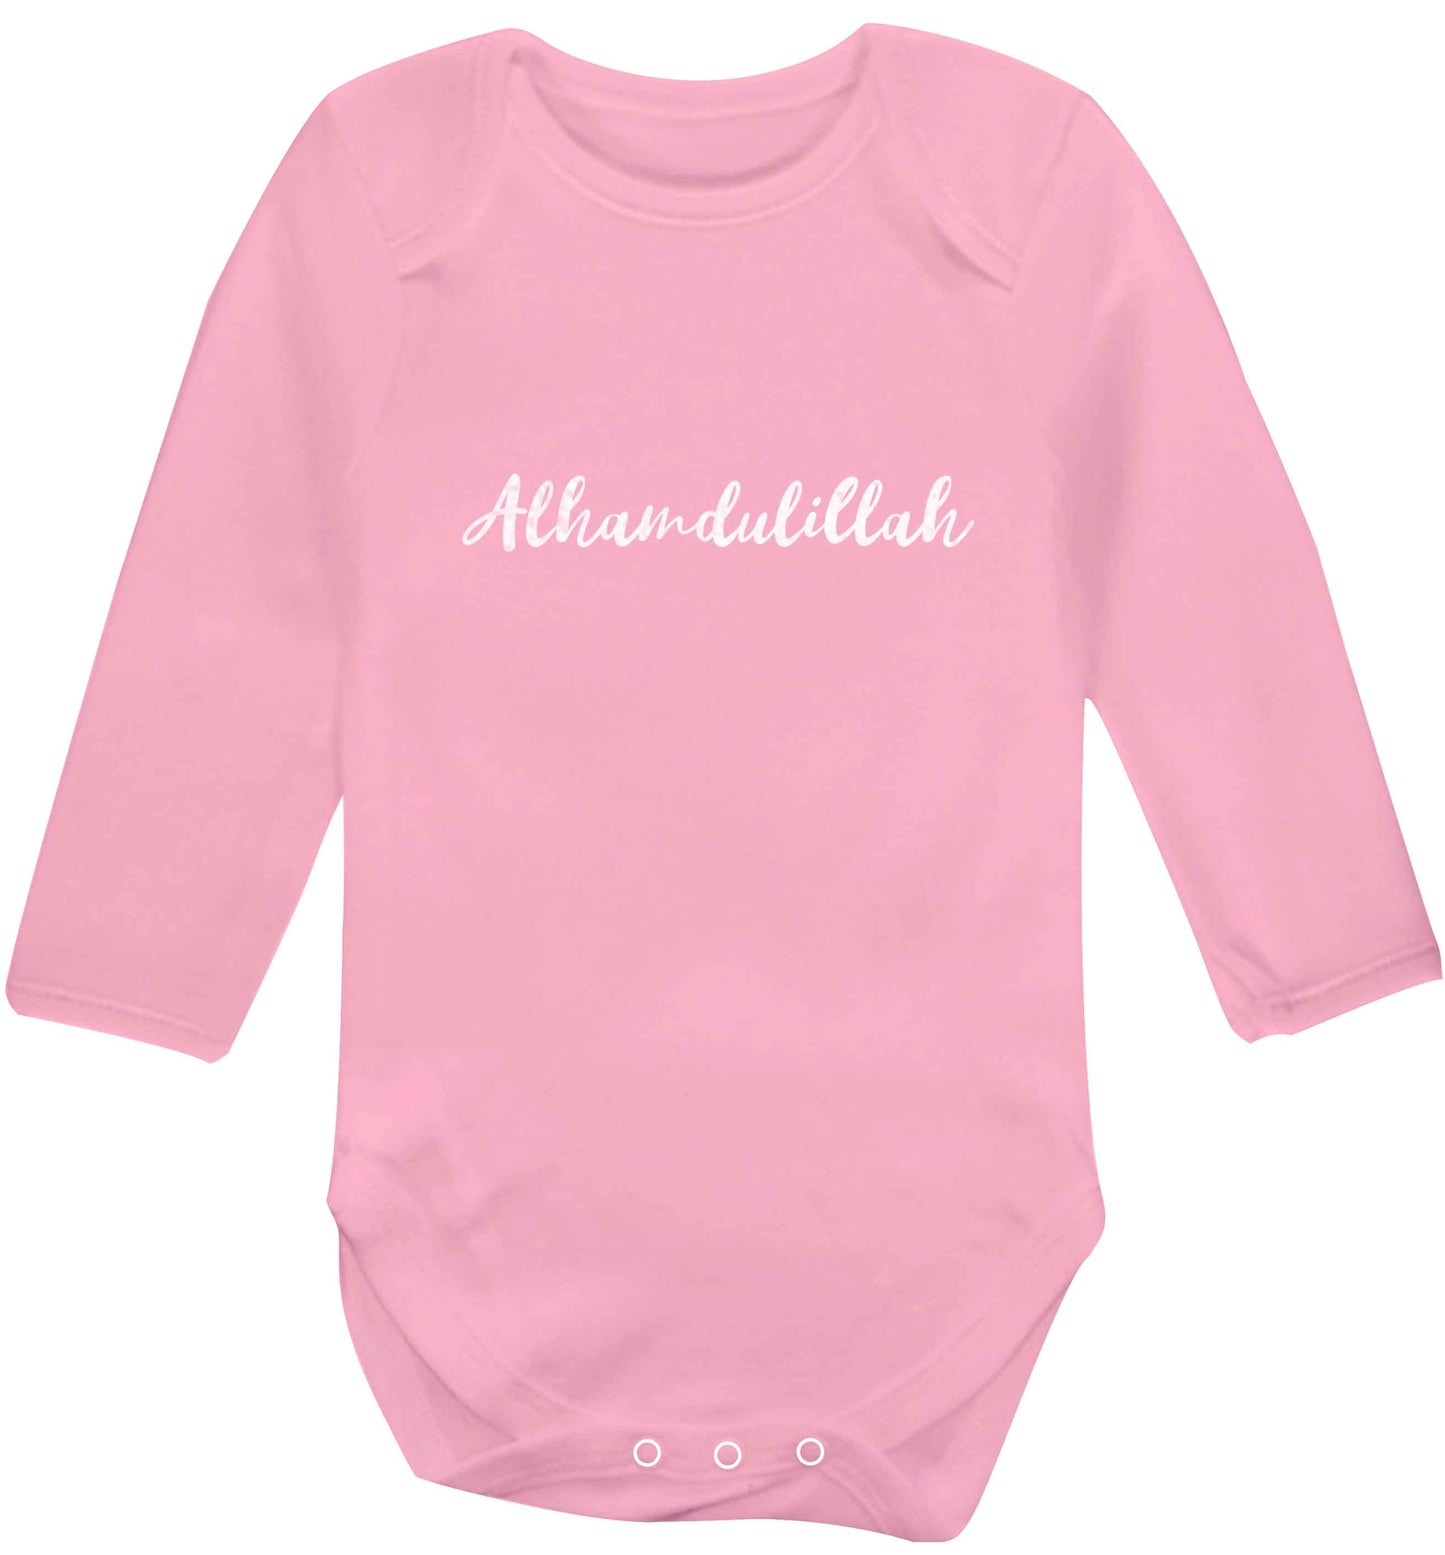 alhamdulillah baby vest long sleeved pale pink 6-12 months